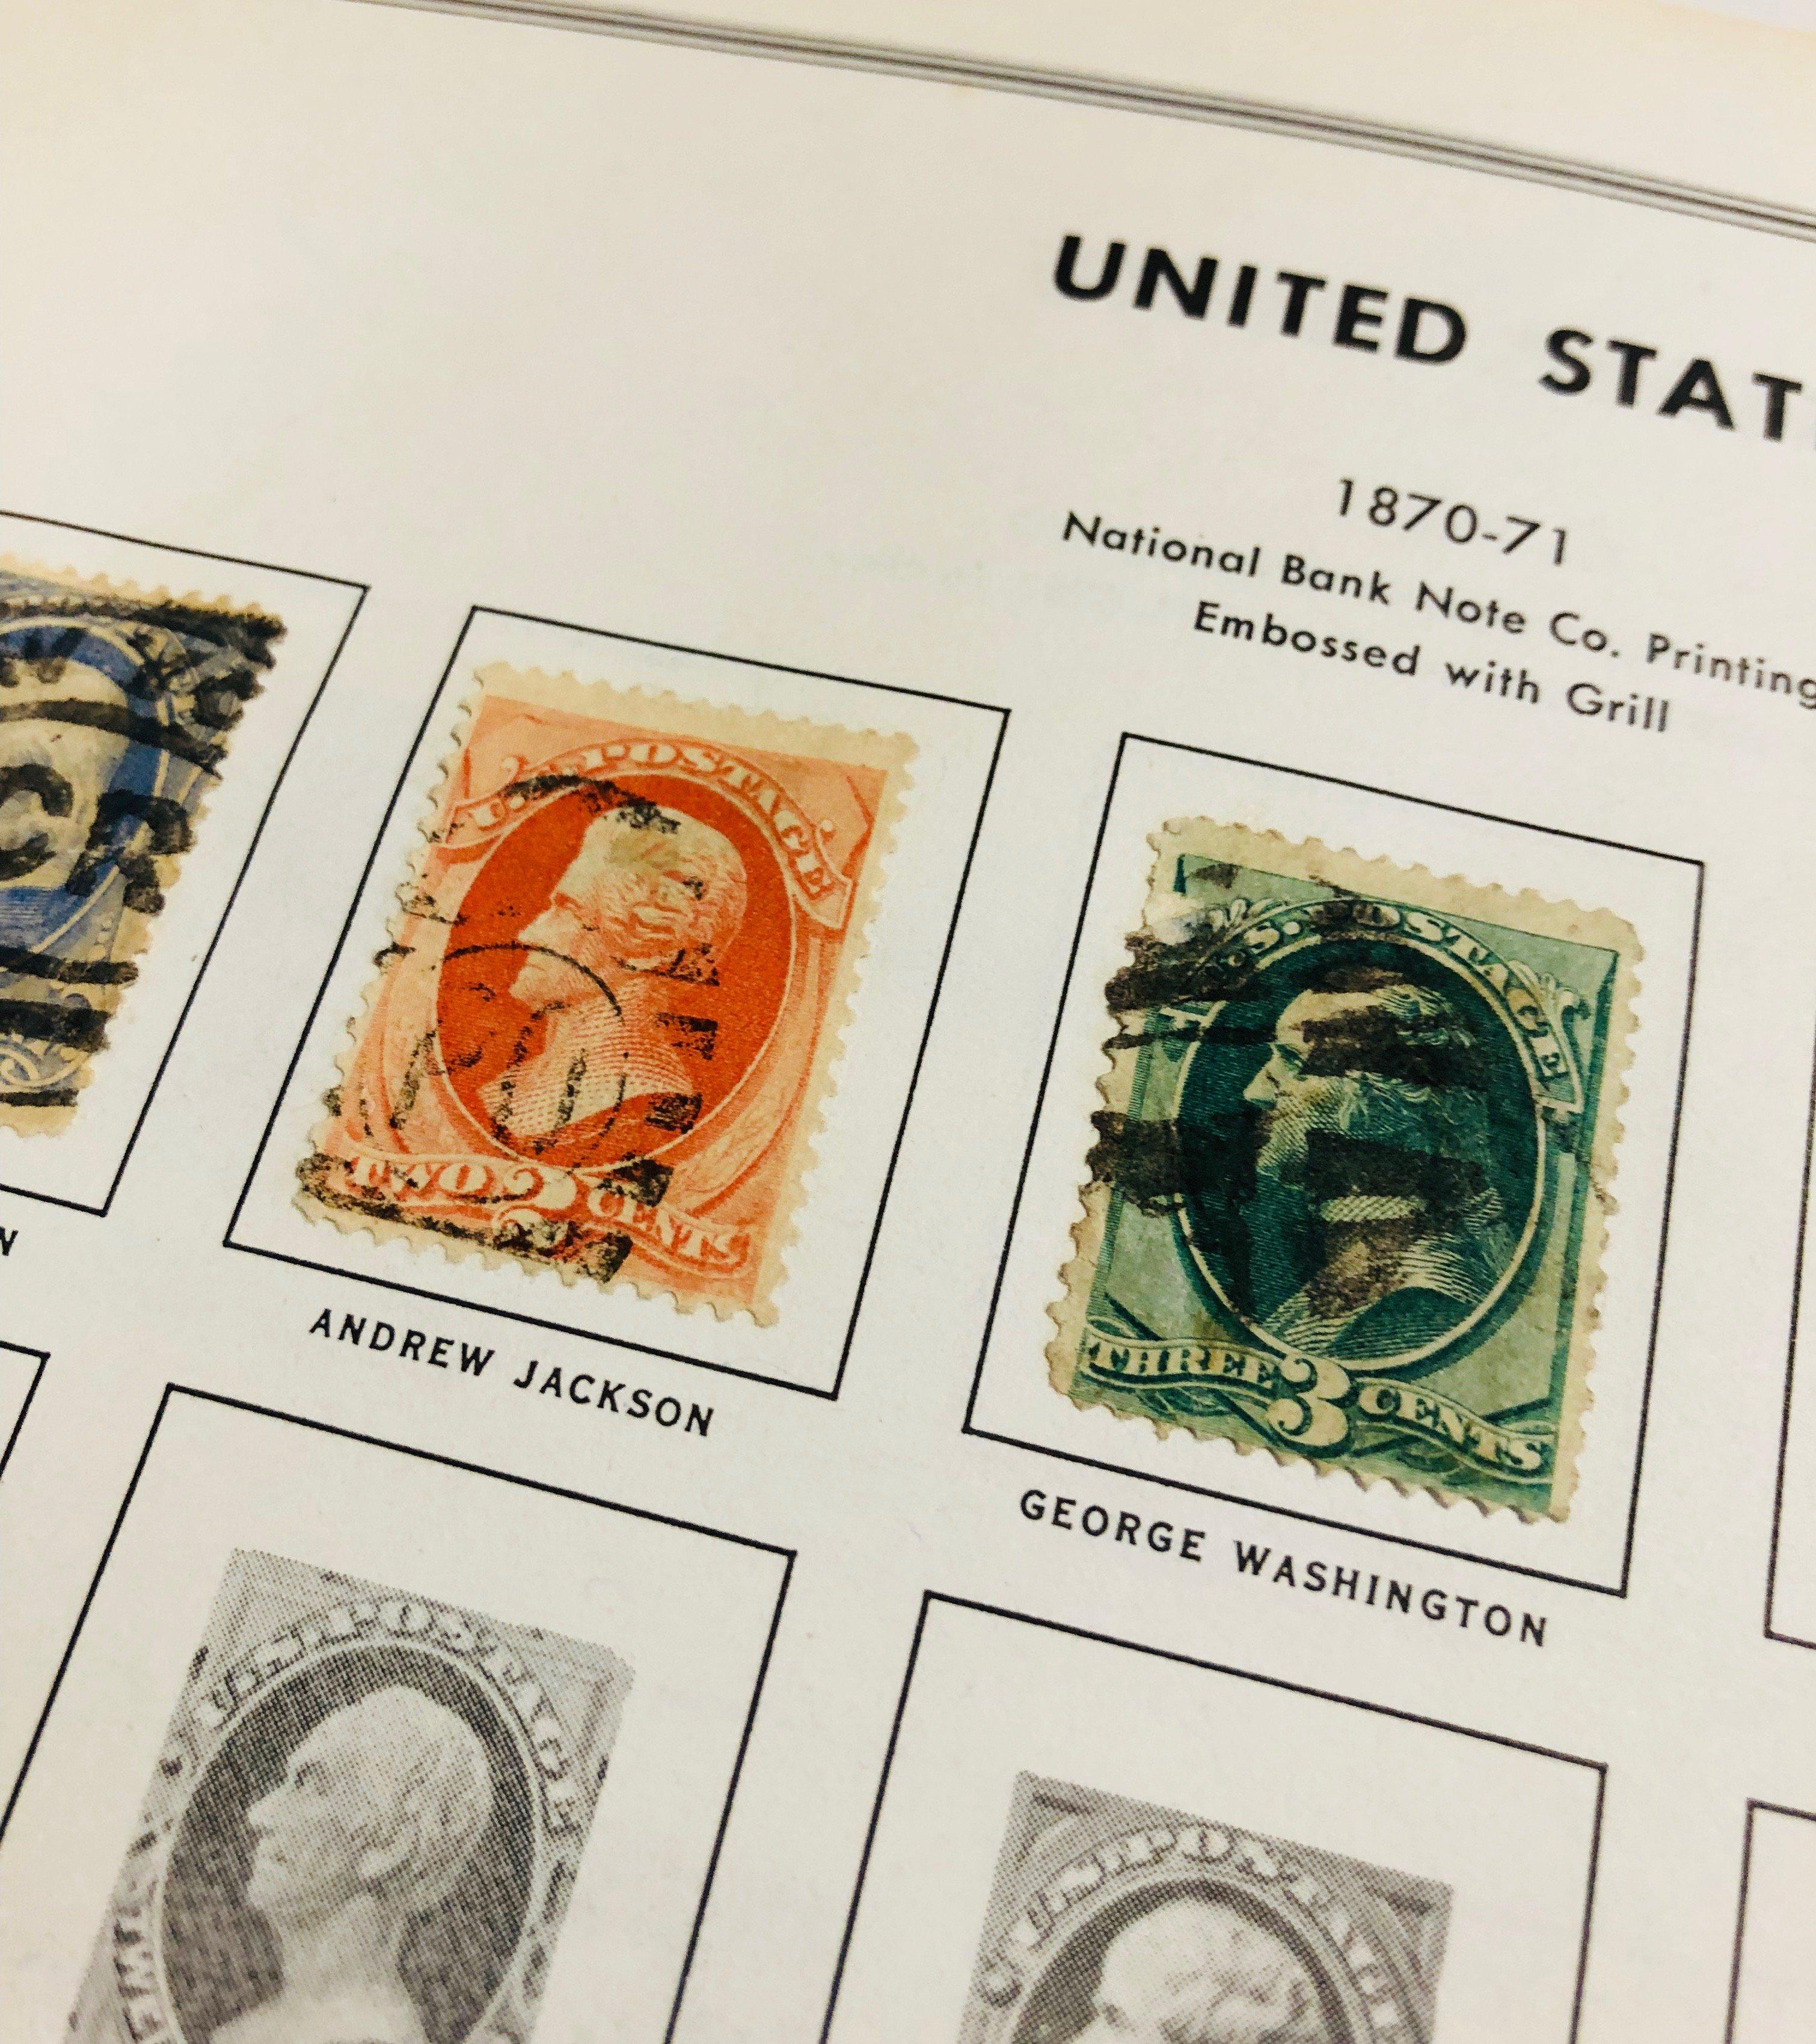 LARGE United States Stamp Album - FILLED WITH STAMPS